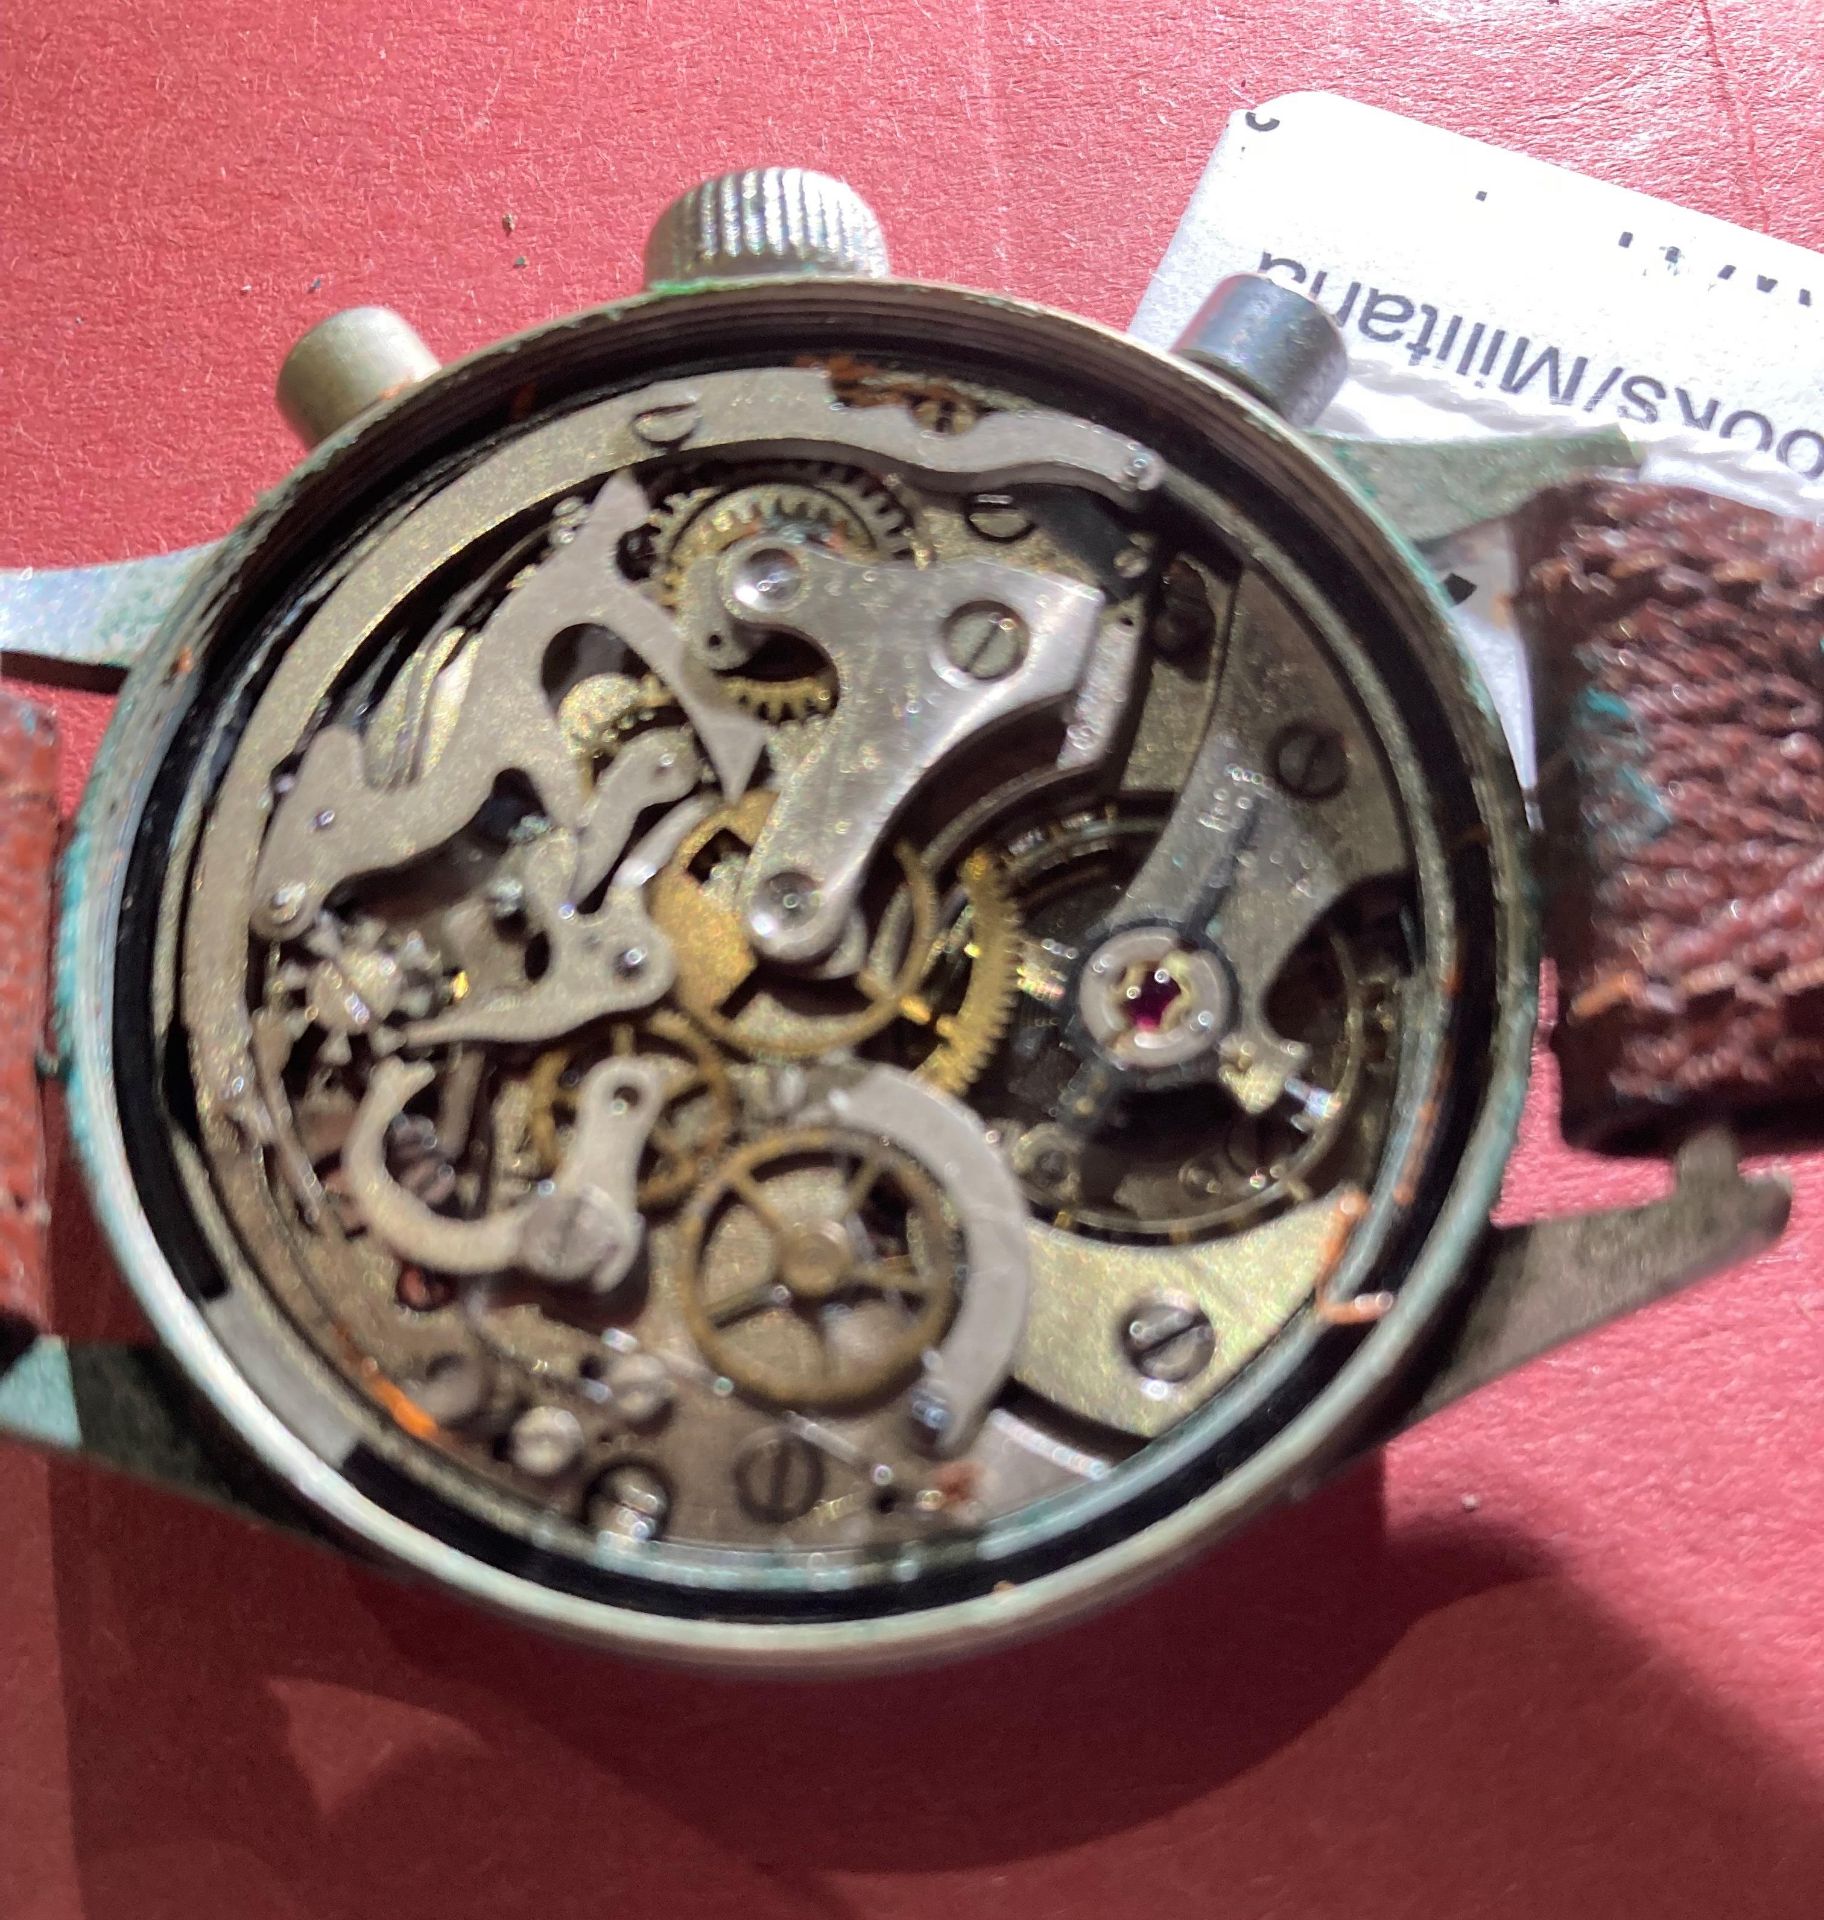 A Hanharts World War II Luftwaffe pilots chronograph with black face and brown leather strap - Image 9 of 10